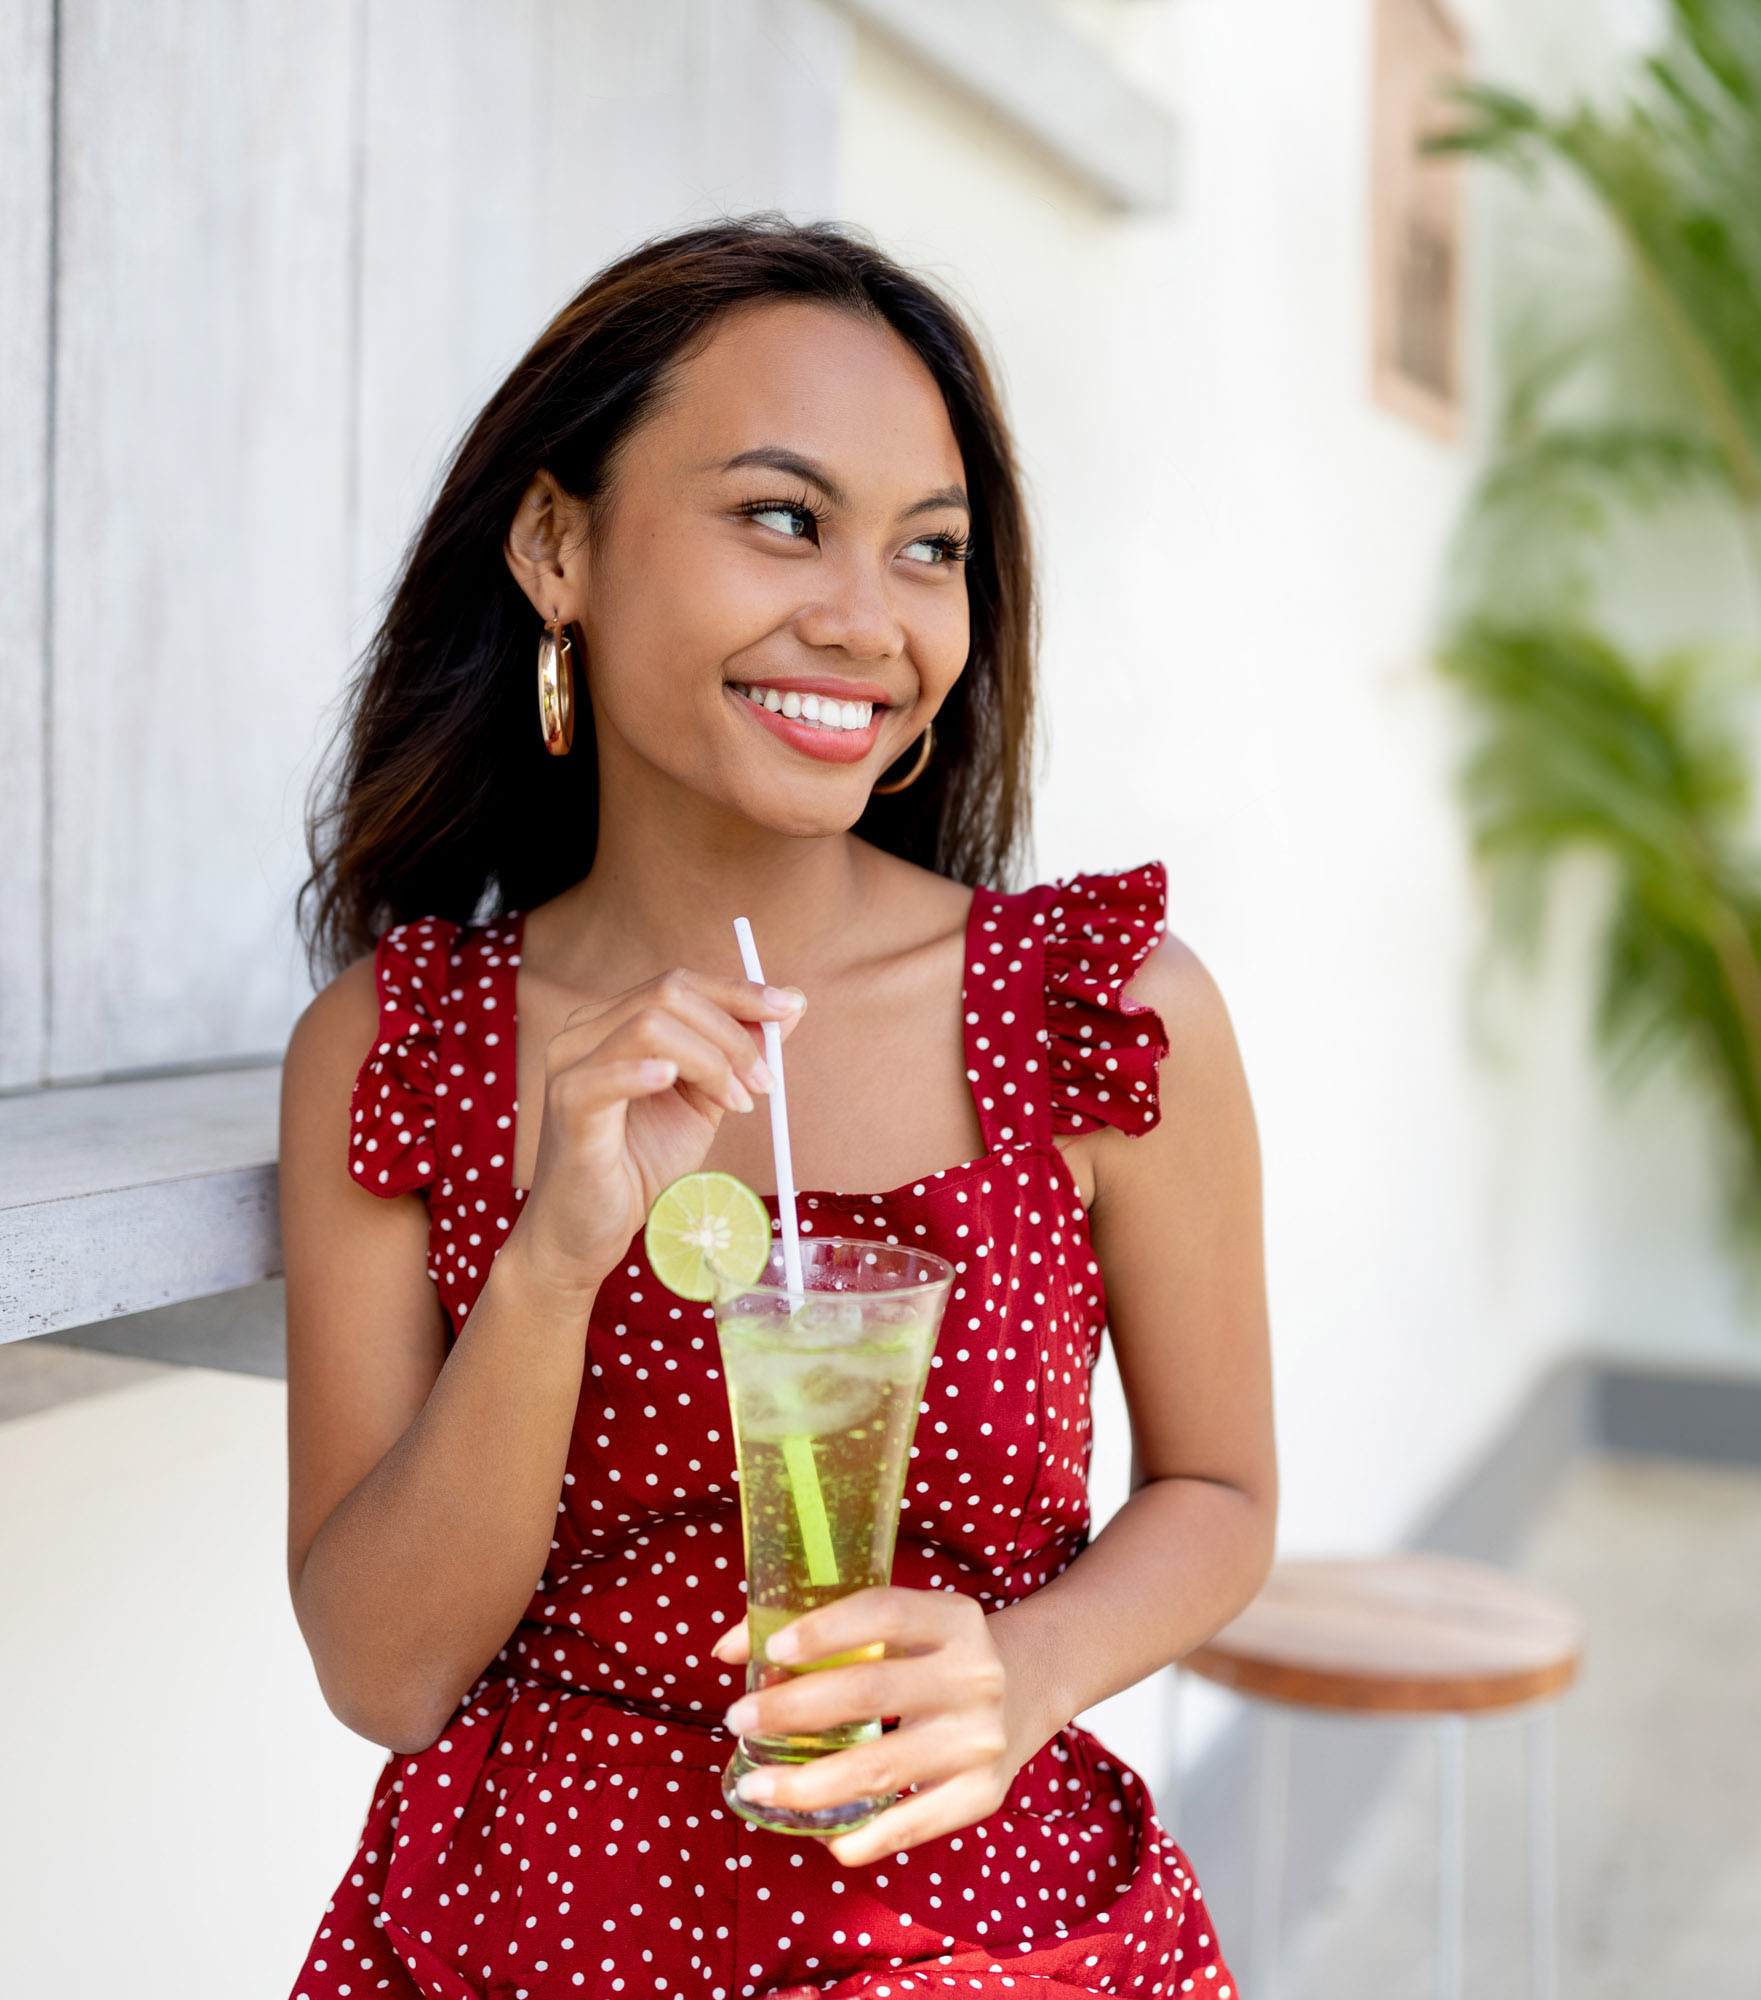 Woman drinks cocktail on a sunny day in bali while wearing red | Lifestyle Photography | Swimwear Photography | Asian Bali Model | High Key Photography | Fashion Photography